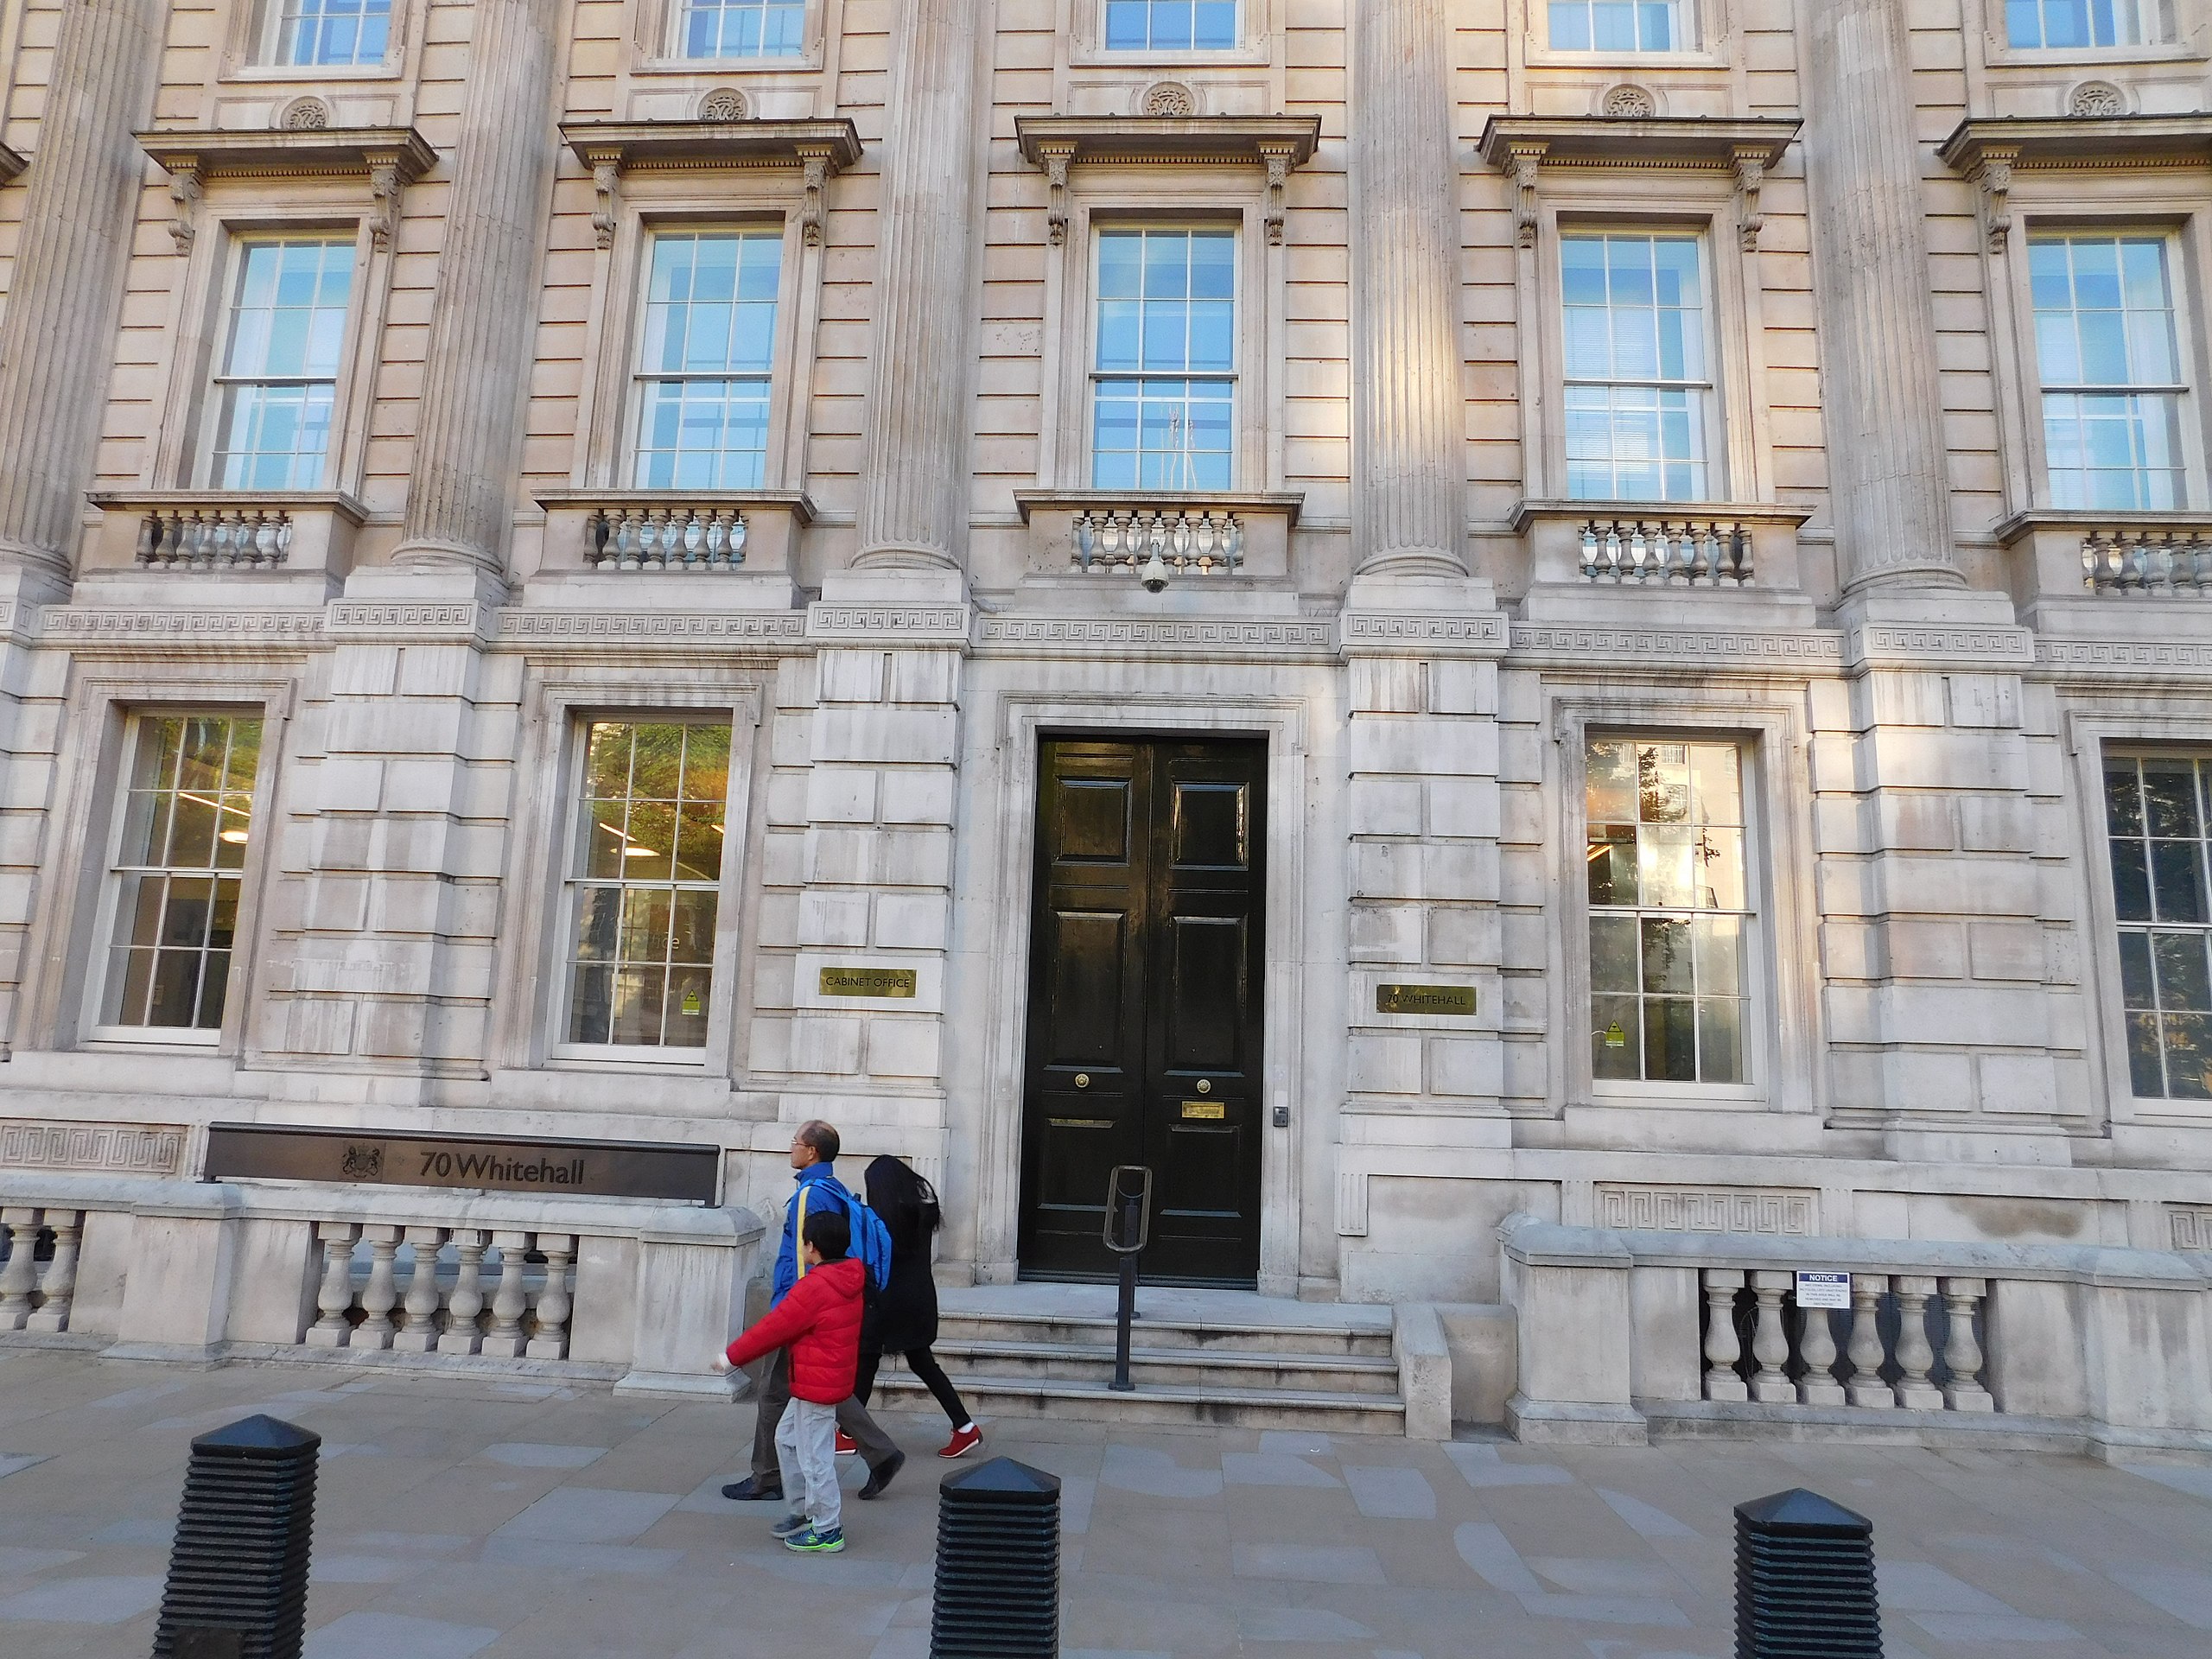 File:Cabinet Office, 70 Whitehall,  - Wikimedia Commons